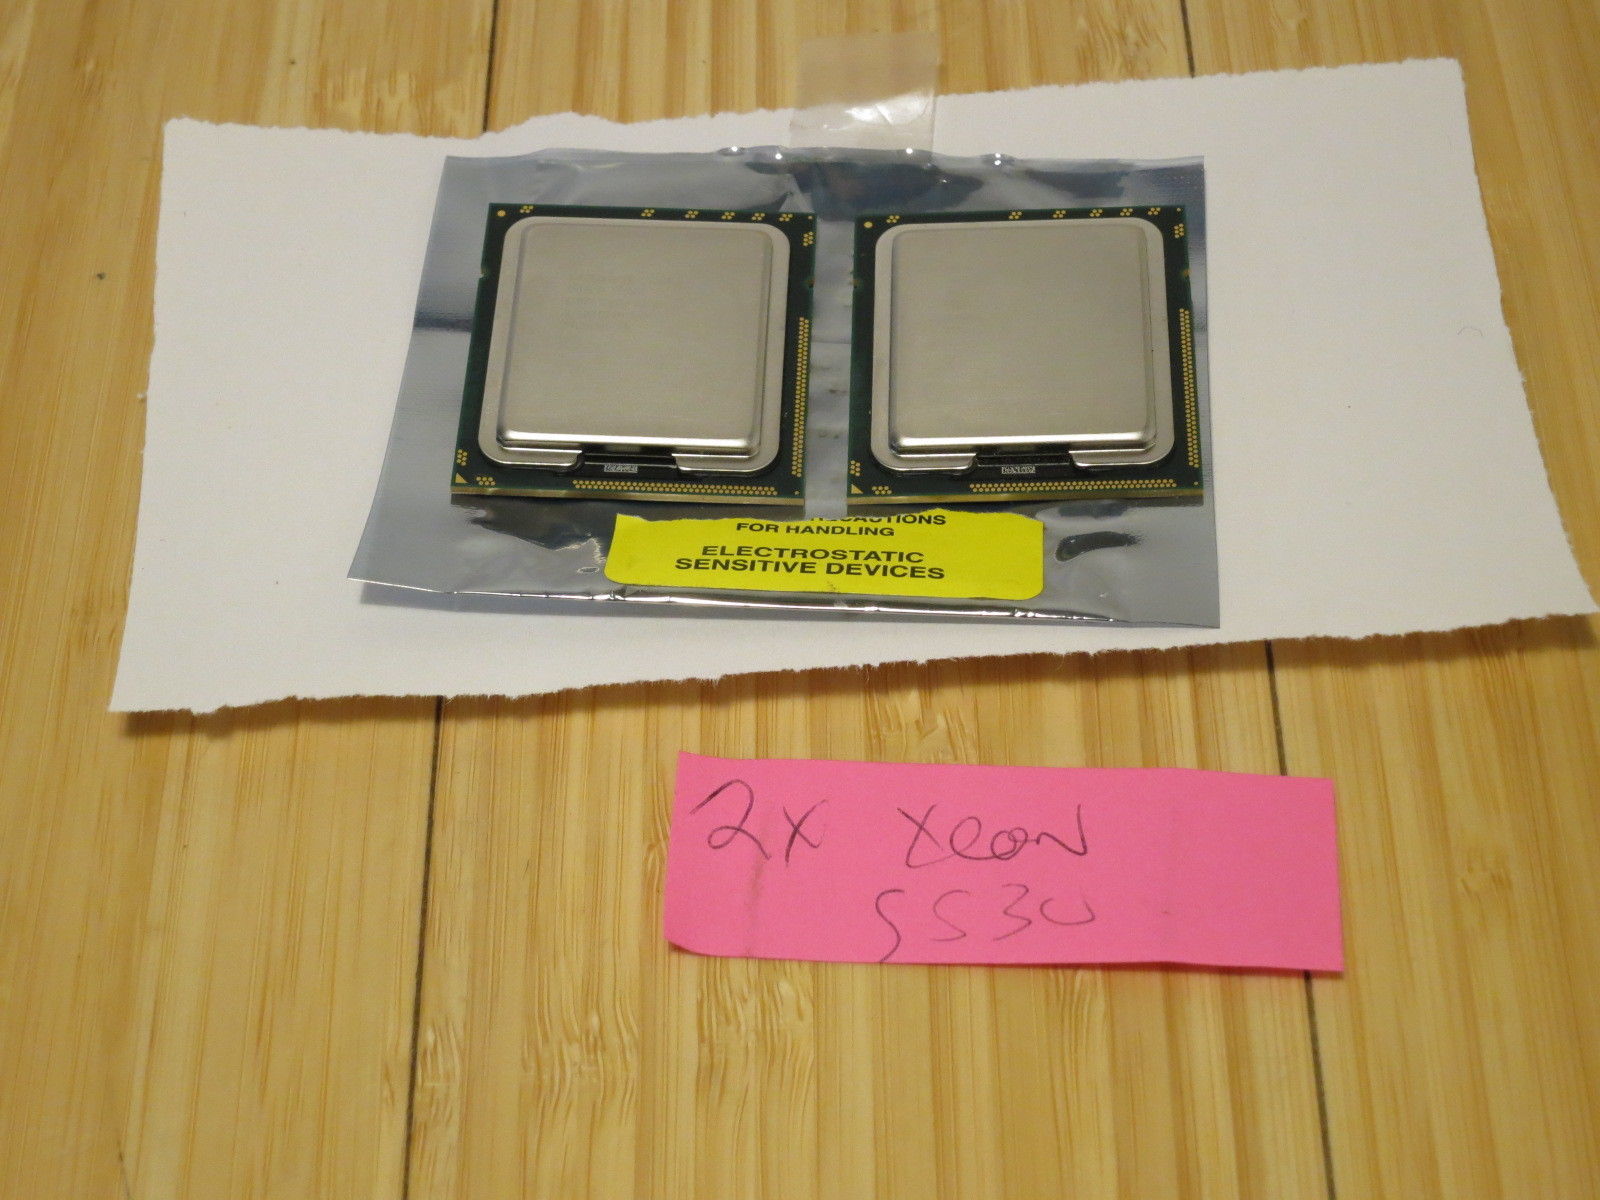 Matched Pair of Intel Xeon E5530 2.4GHz 8MB Quad Core Processor SLBF7 (1 of 4) - $18.69